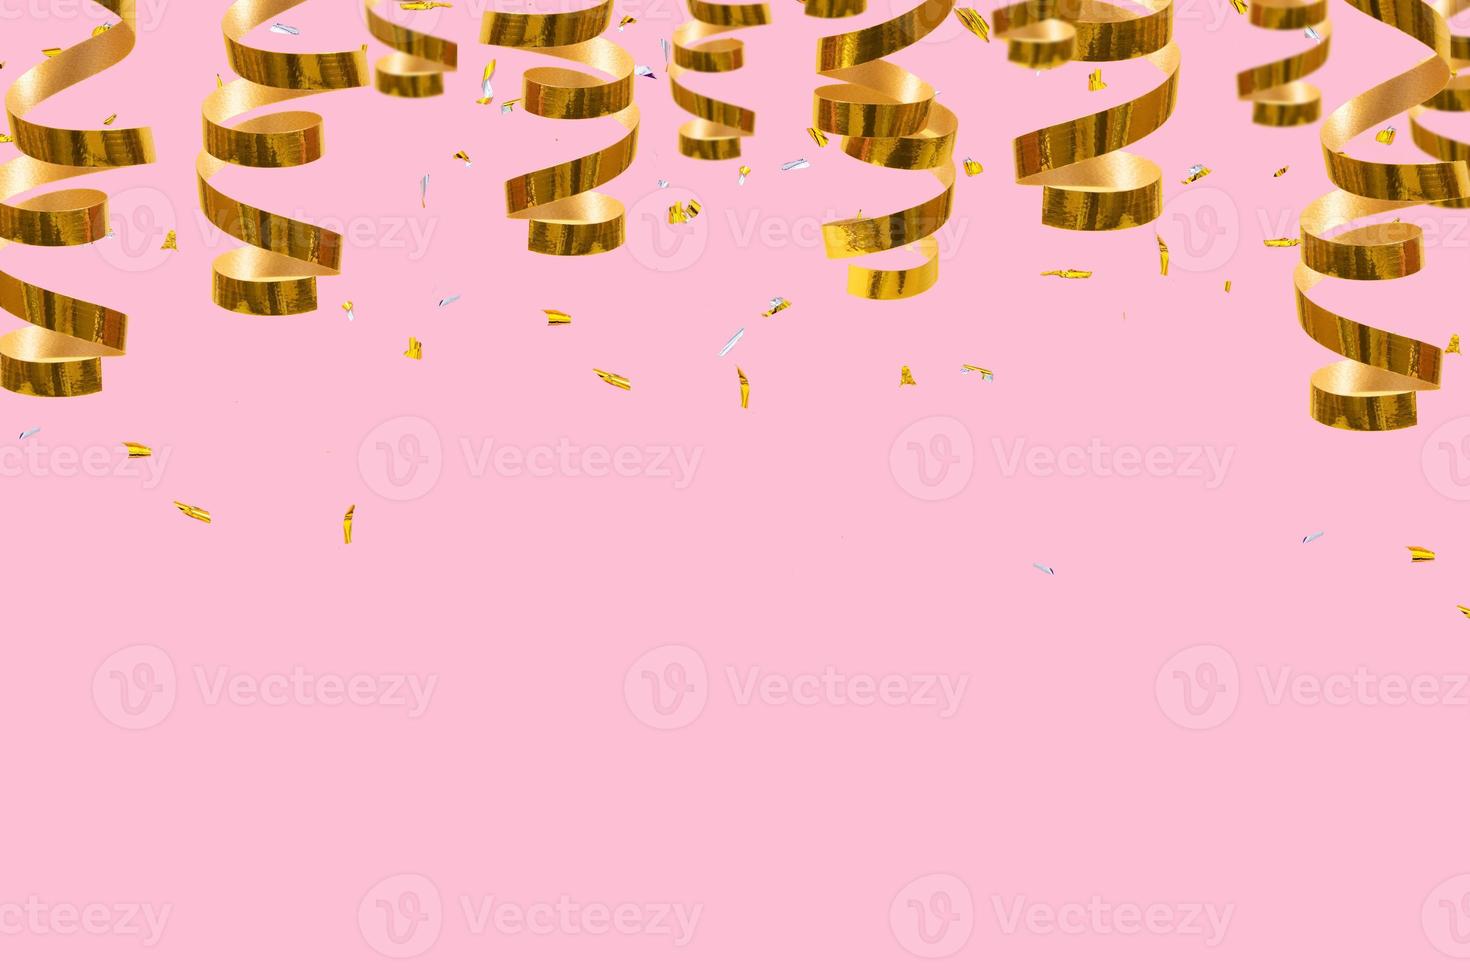 Golden shiny spirals, streamers and confetti on a red background with place for text. Festive christmas background photo